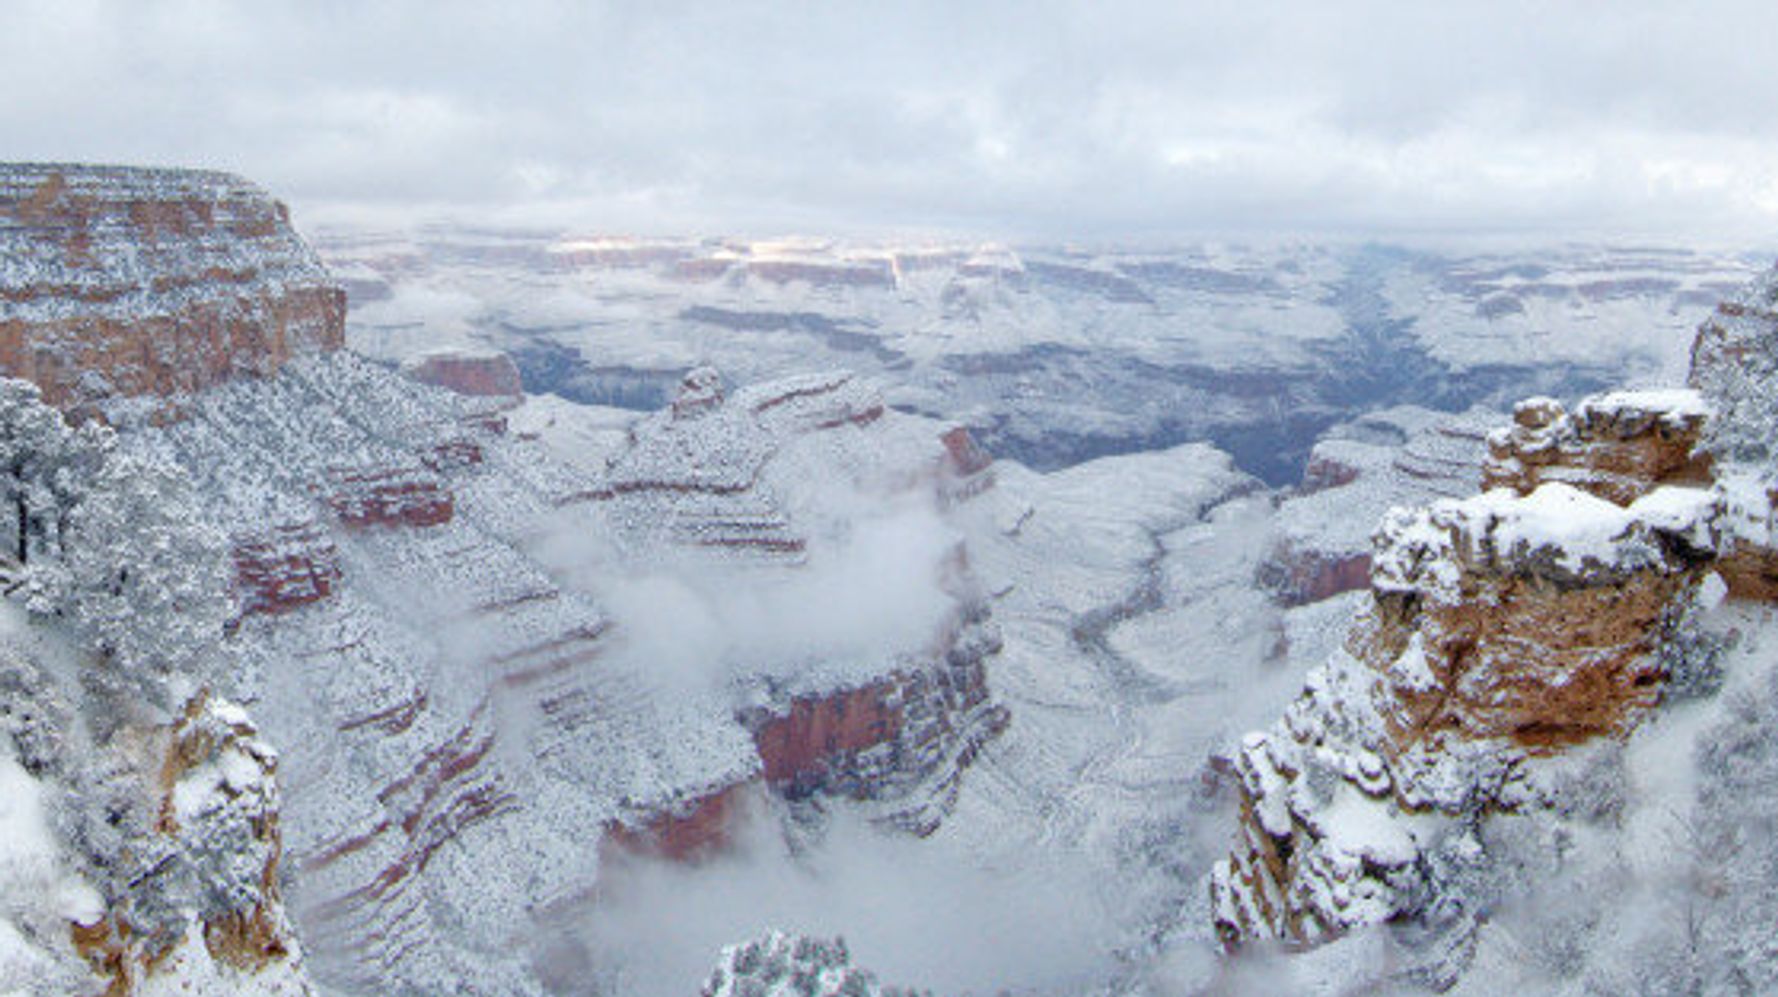 Photos Of The Grand Canyon Buried In Snow On New Year's Day Are